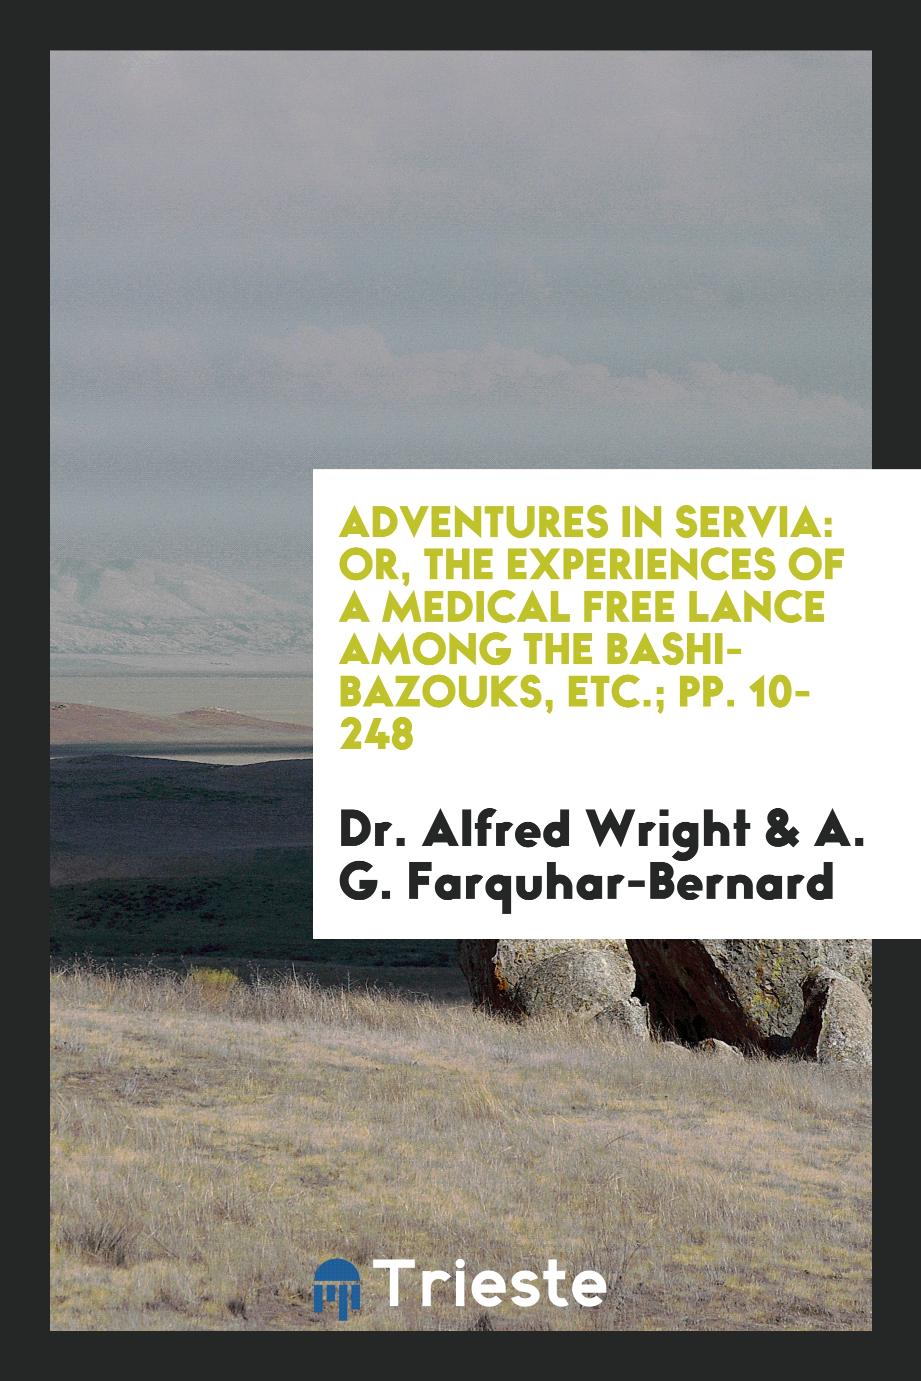 Adventures in Servia: Or, The Experiences of a Medical Free Lance Among the Bashi-Bazouks, Etc.; pp. 10-248